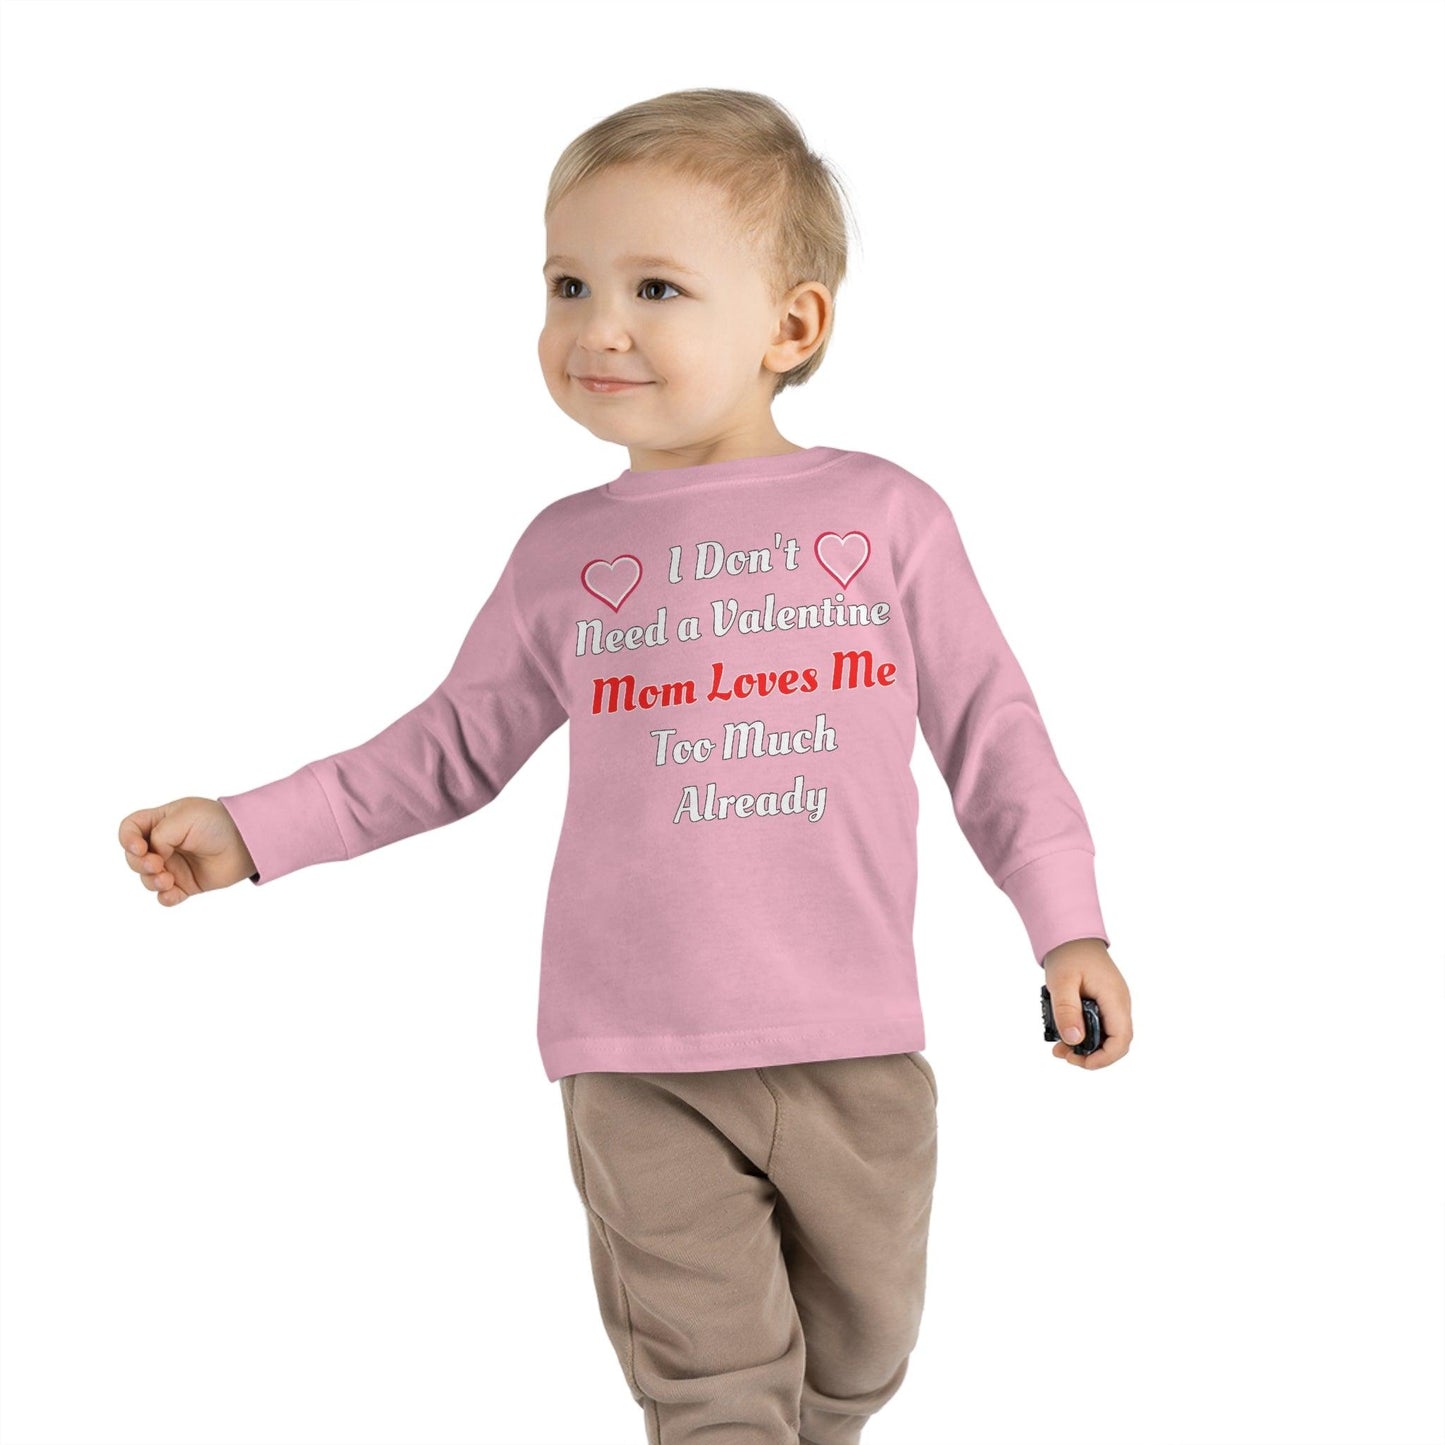 I don't need a valentine mom loves me too much already Toddler Long Sleeve Tee - Giftsmojo